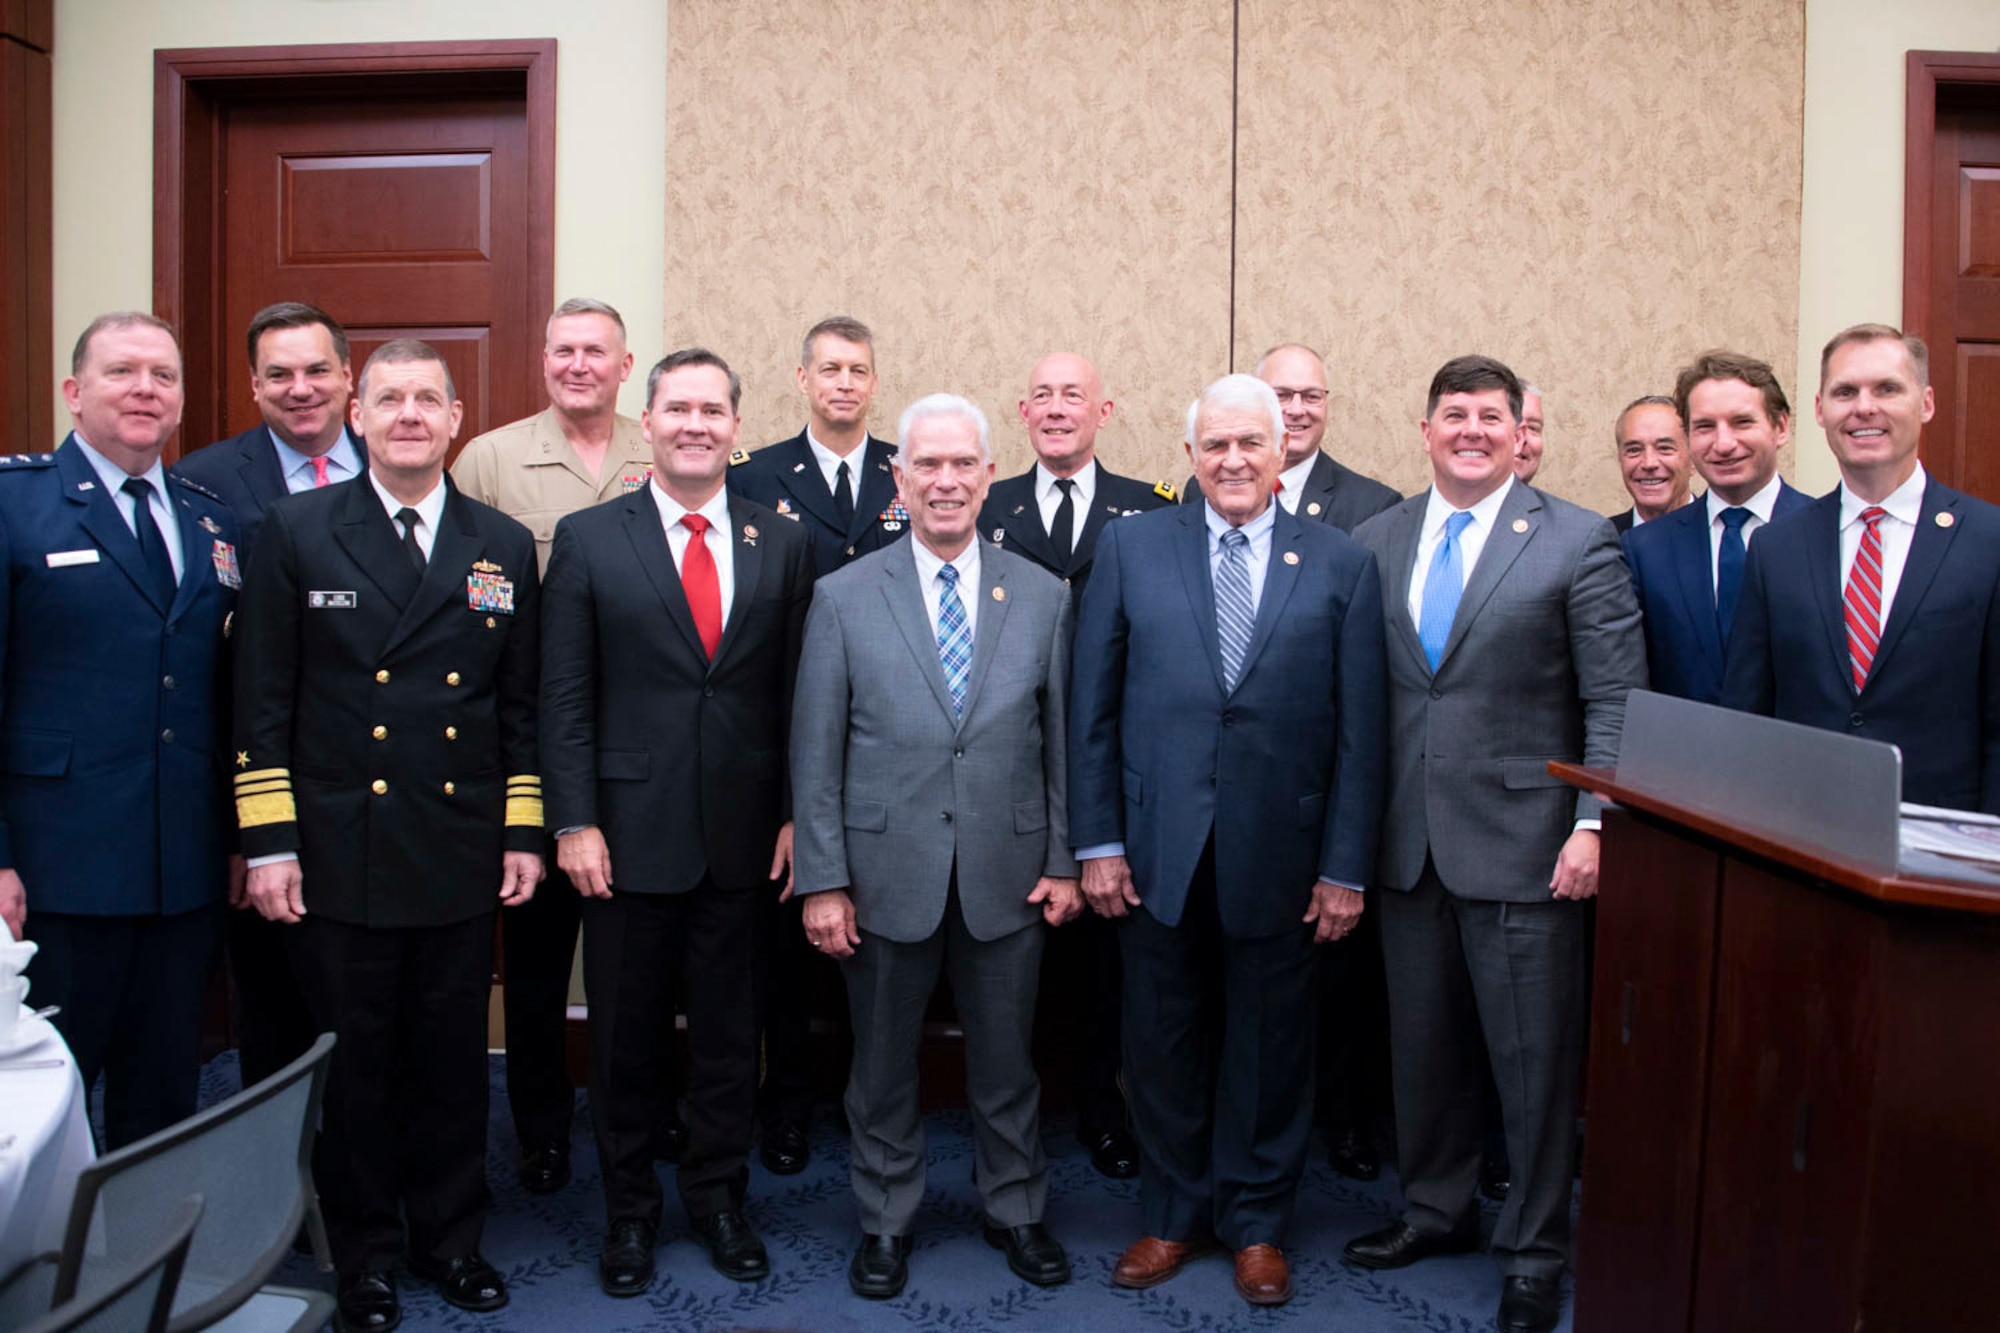 Service components chiefs, designated representatives and caucus members, pose for a photo at the House National Guard and Reserve Component Caucus Breakfast at the U.S. Capitol, Washington D.C., April 30, 2019. The NGRCC is one of the largest in Congress and was created in 1996 to ensure National Guard and Reserve components have the tools, training, equipment and leadership they require to complete their missions. (U.S. Air Force photo by SrA Andreaa Phillips)